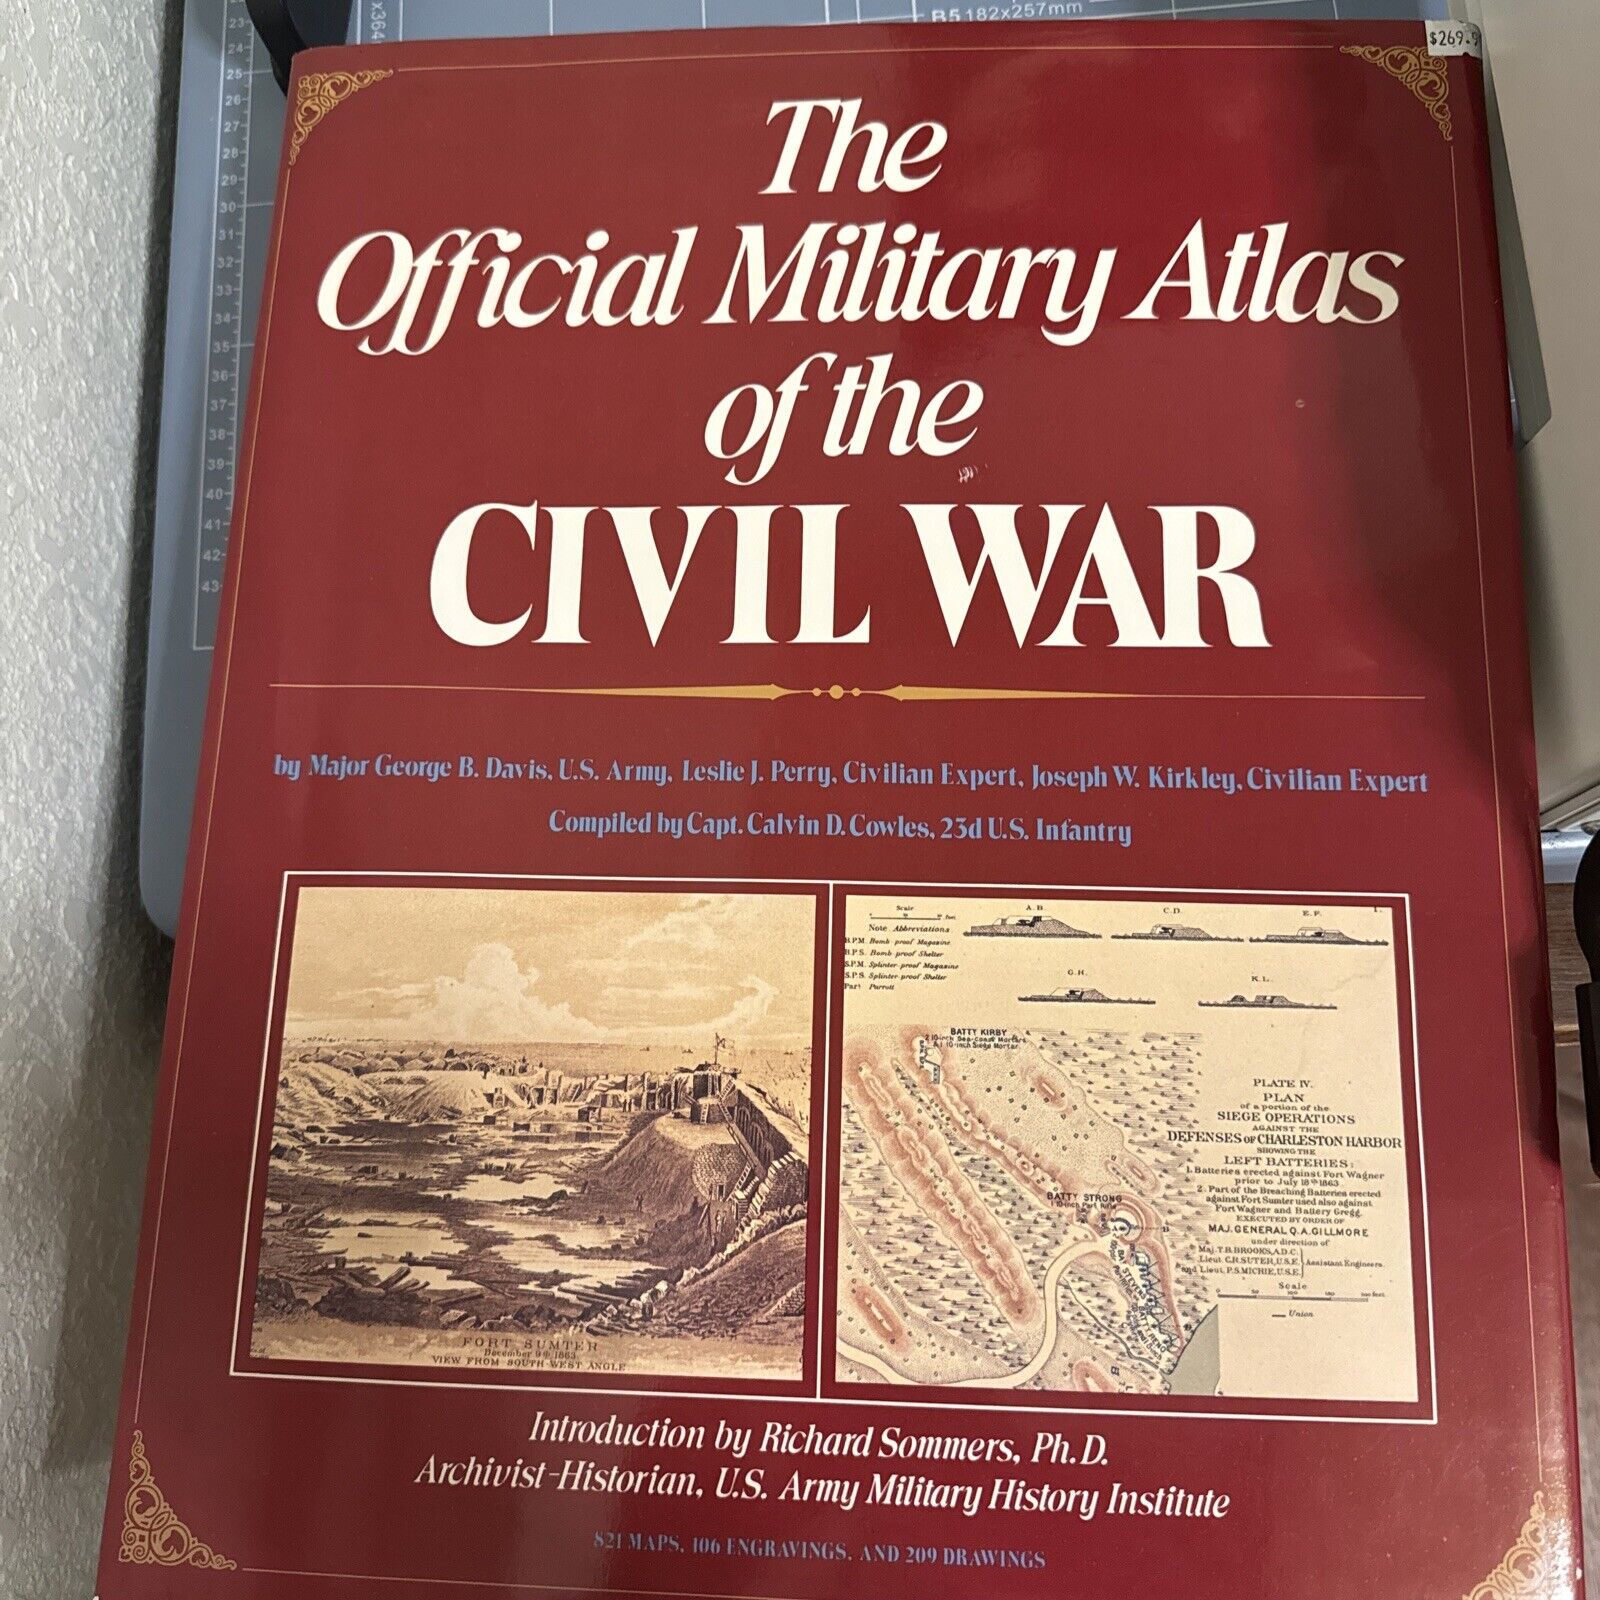 The Official Military Atlas Of The Civil War Introducing By Richard Sommer Ph.D.